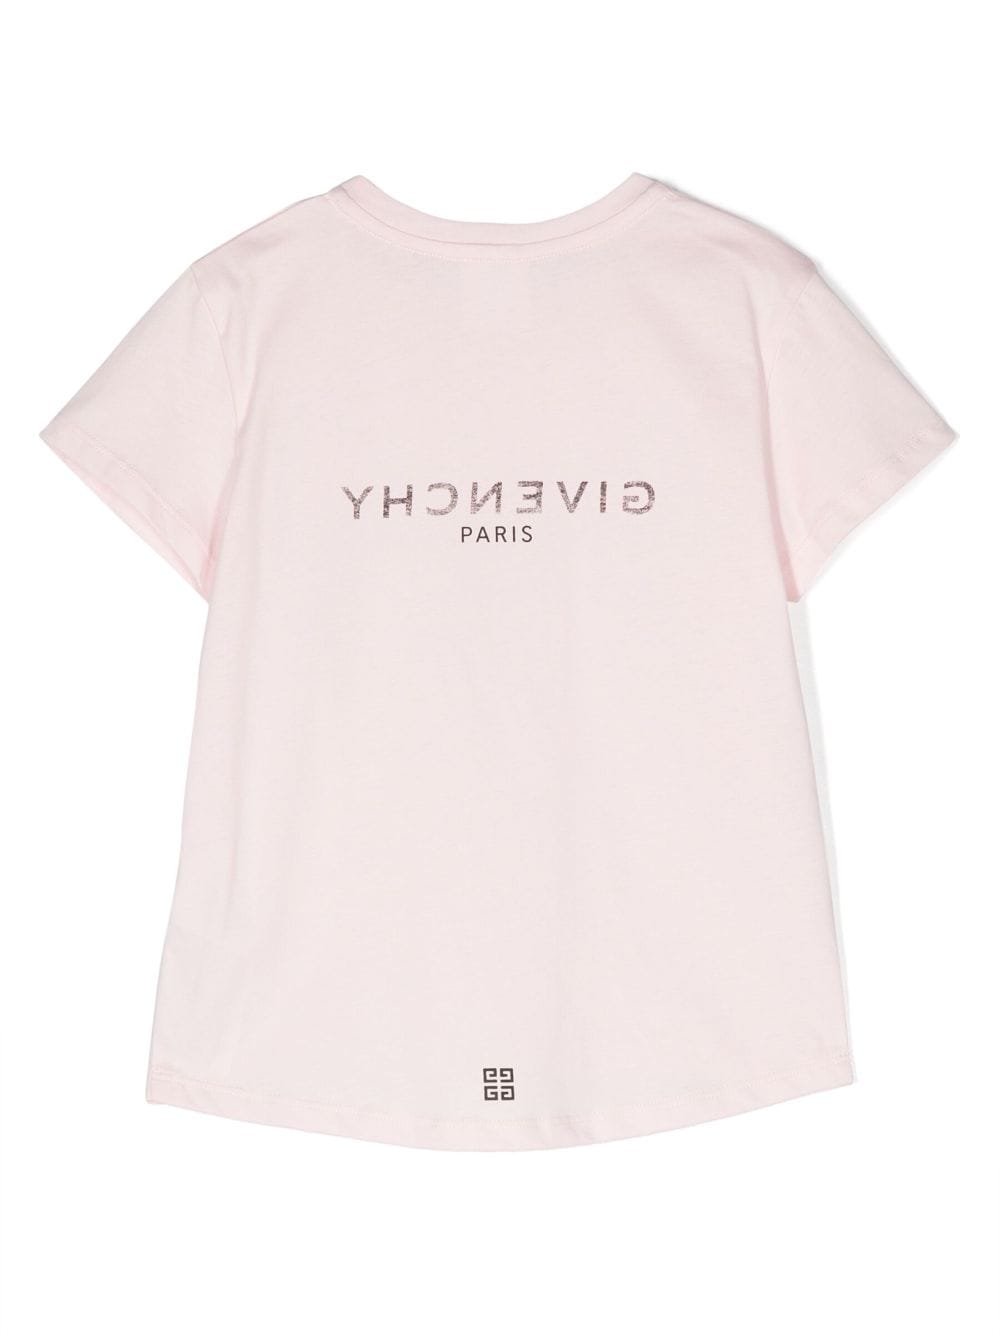 Pink cotton jersey girl GIVENCHY t-shirt